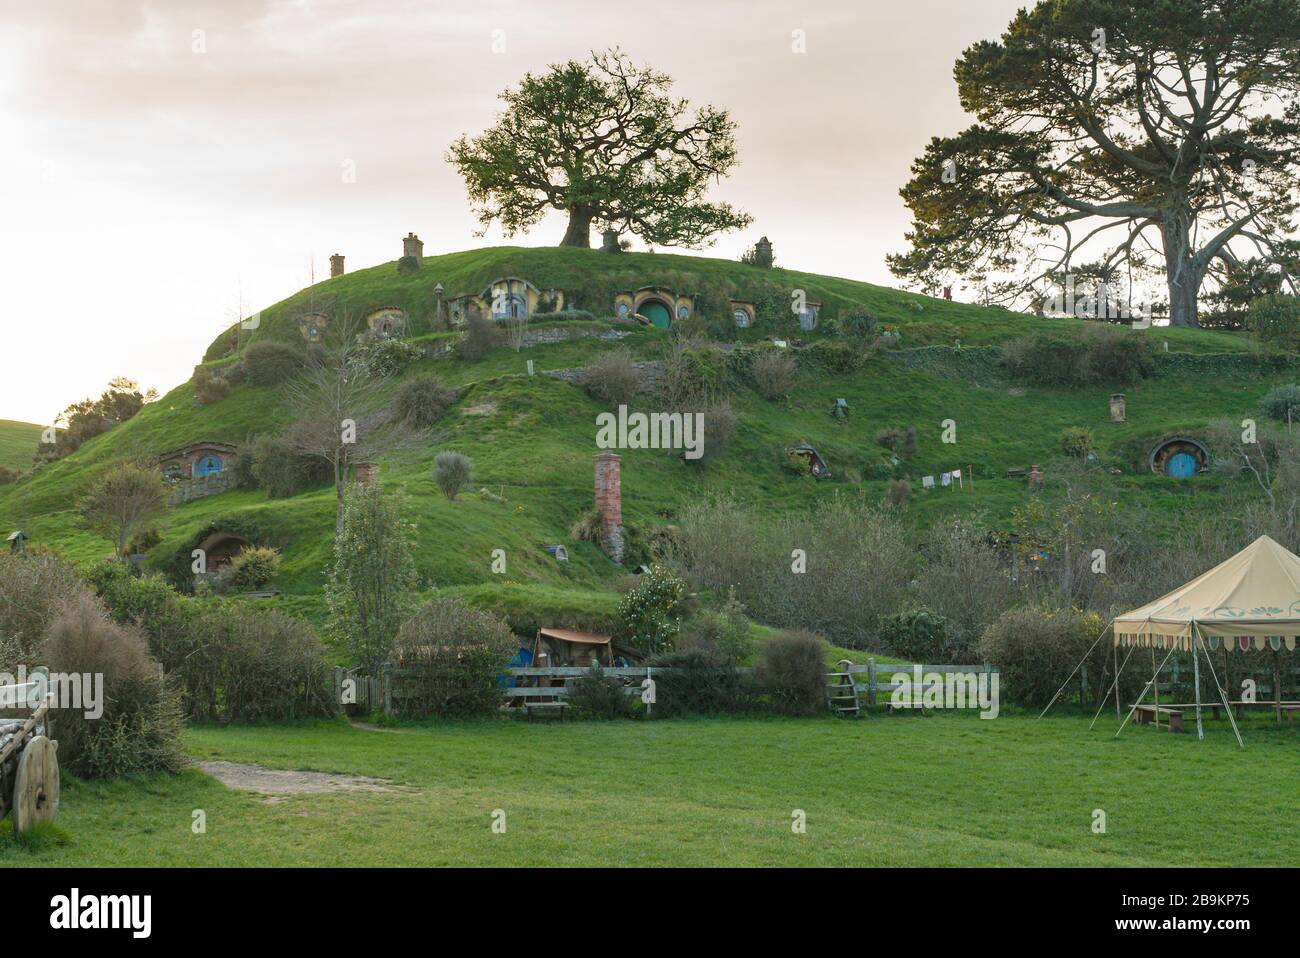 The sun sinks behind Bag End in the Hobbiton Movie Set, New Zealand Stock Photo